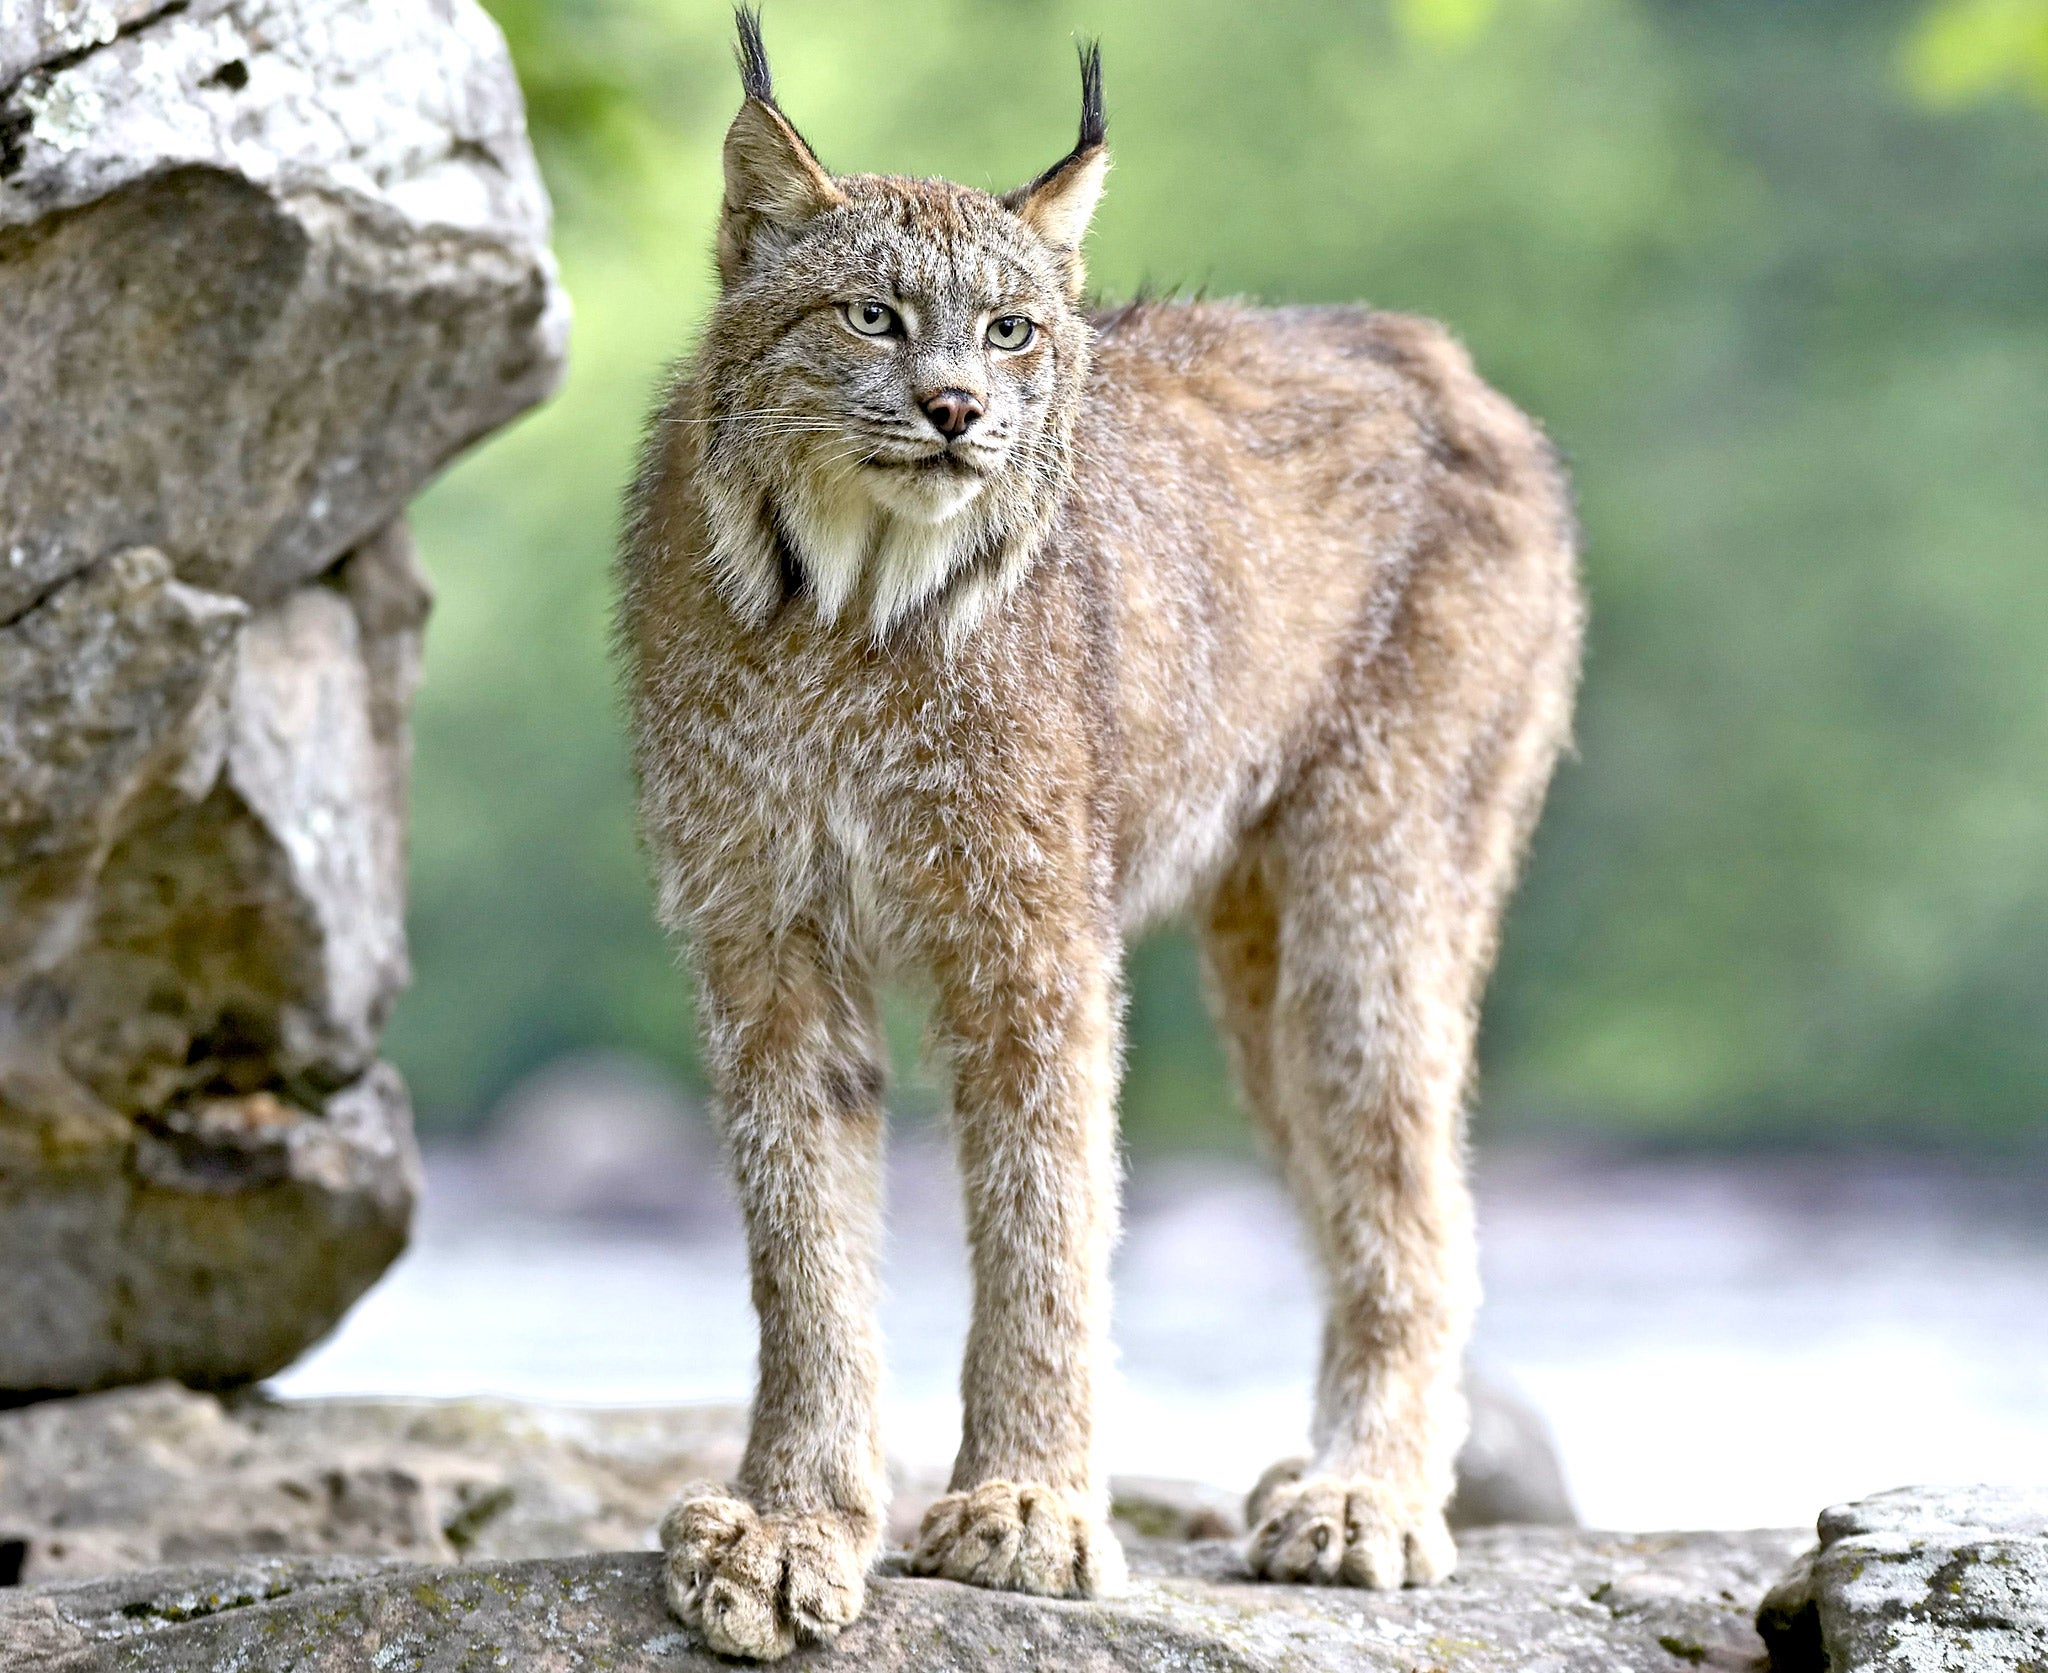 Lynx is evidence that big cat did roam Britain – but it's the stuff of